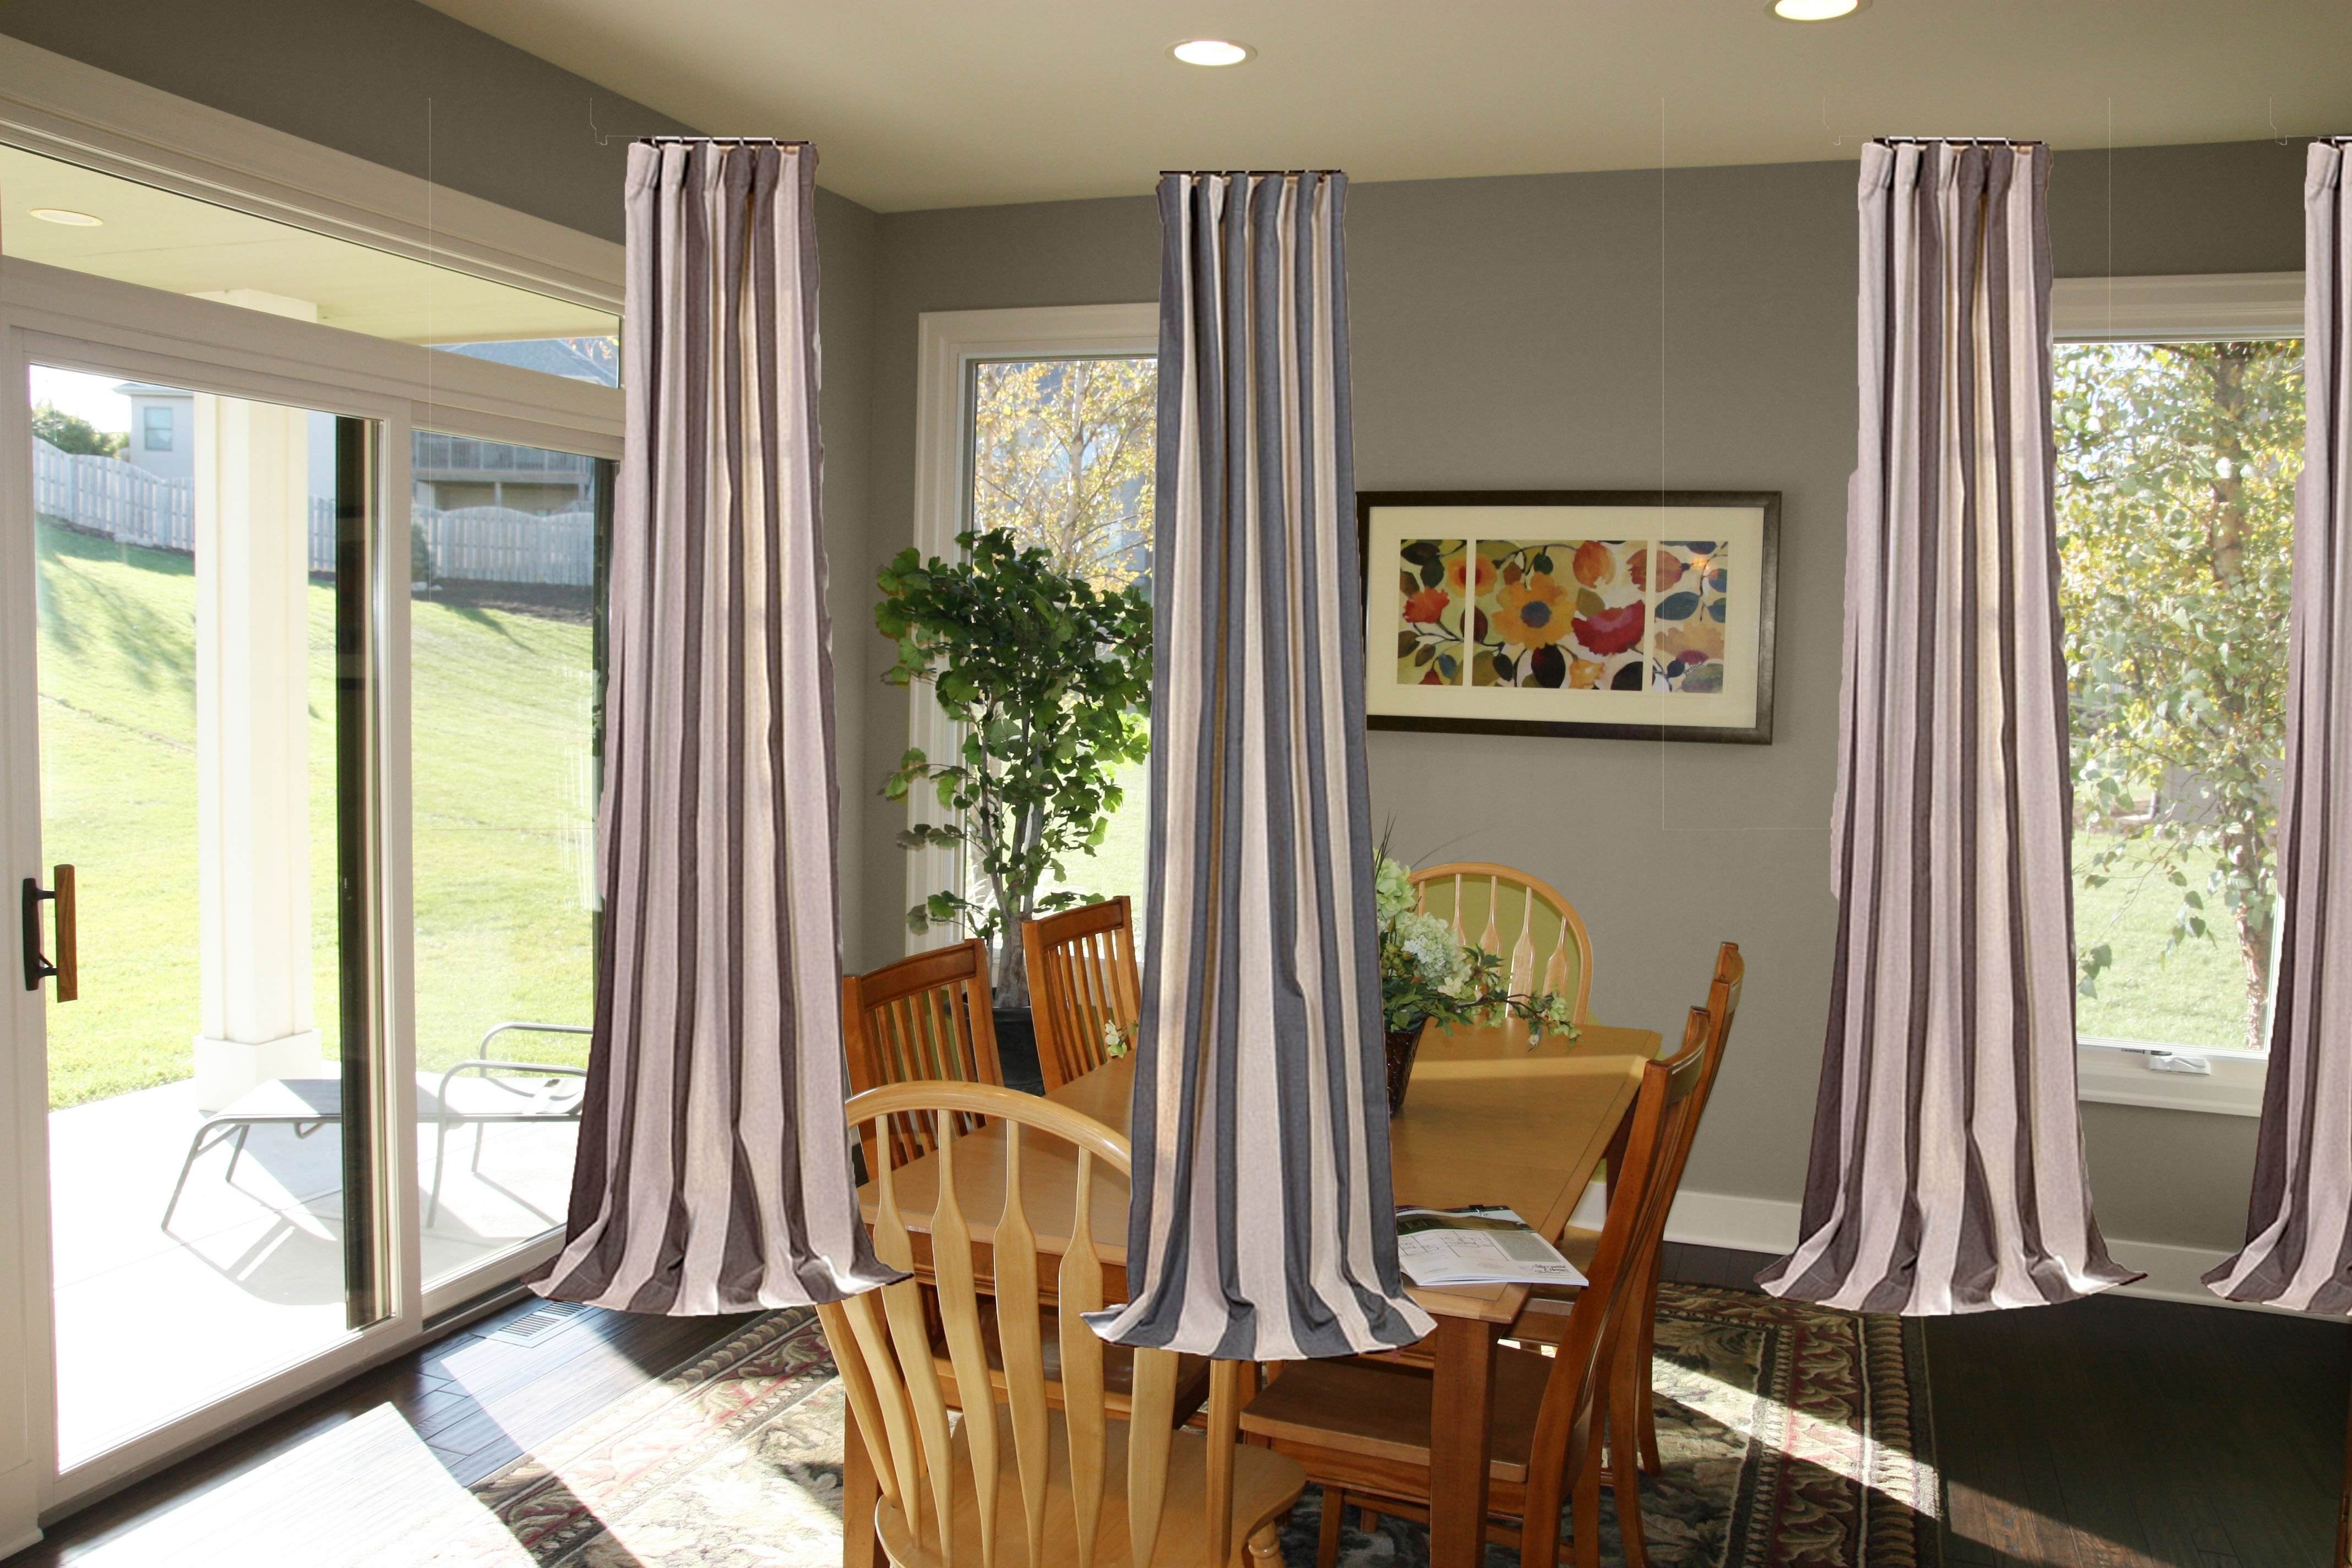 10 Unique Curtain Ideas For Big Windows window treatments for large windows in family decoration country 2022